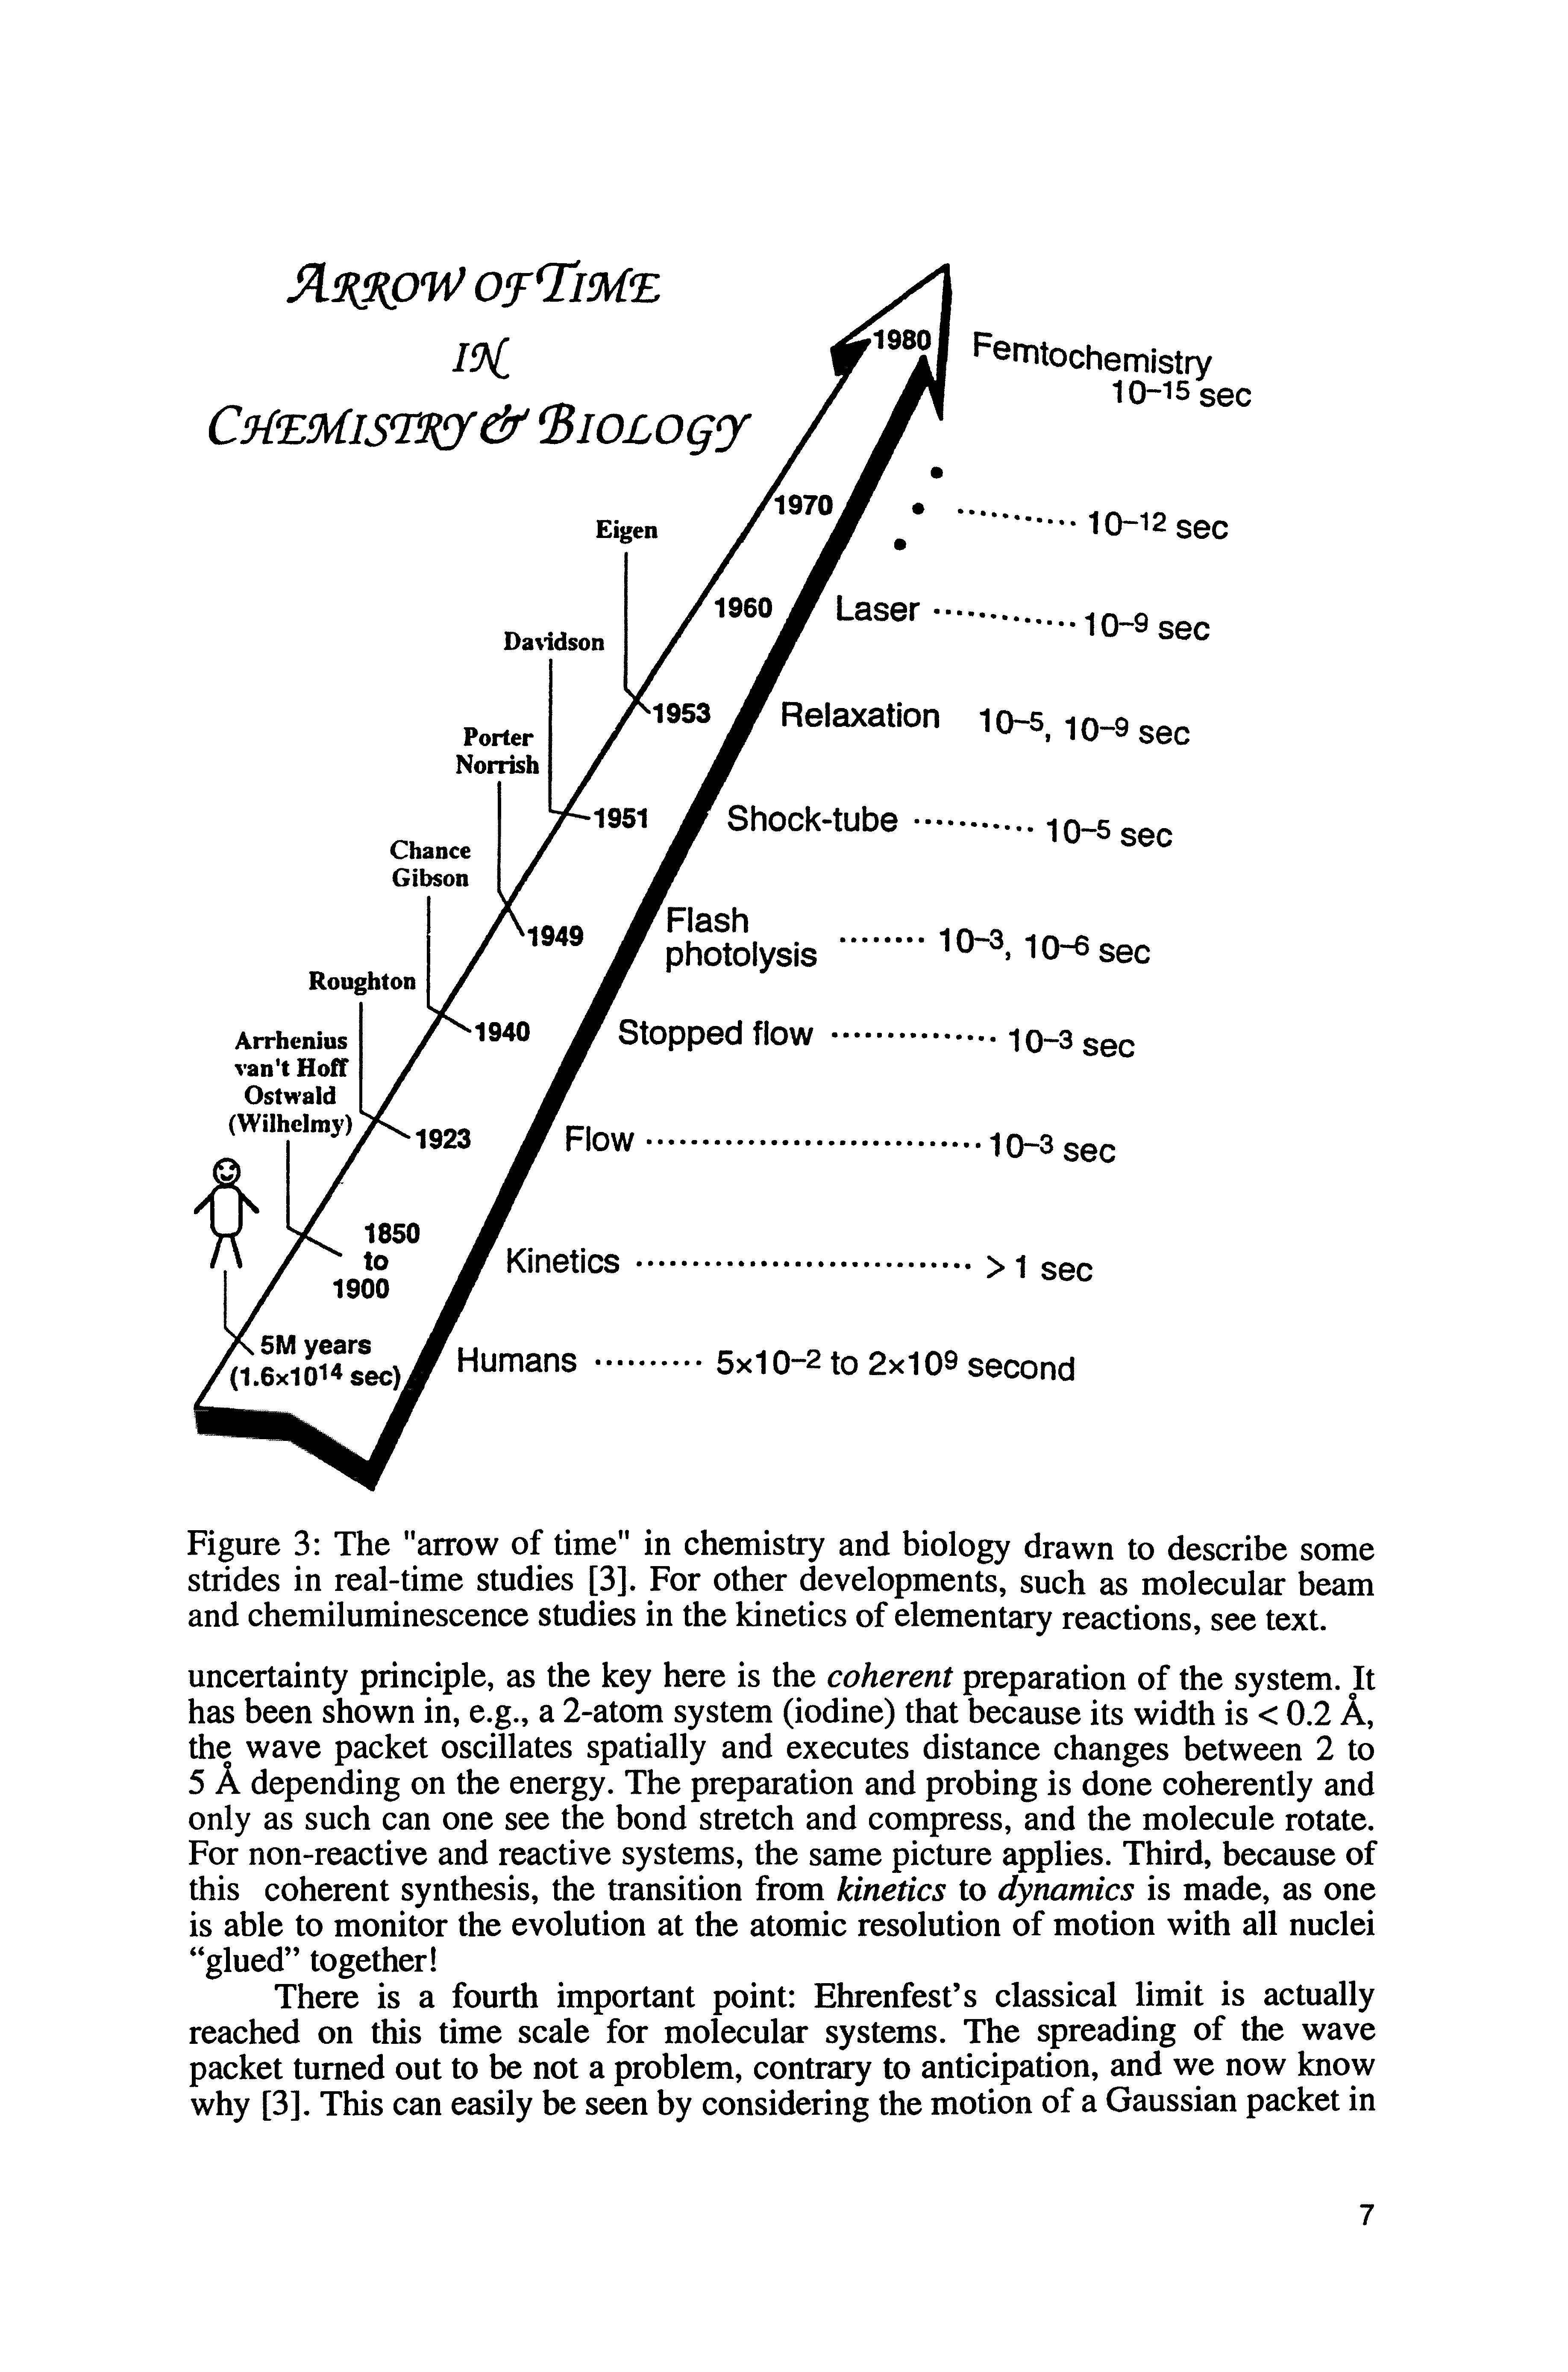 Figure 3 The "arrow of time" in chemistry and biology drawn to describe some strides in real-time studies [3]. For other developments, such as molecular beam and chemiluminescence studies in the kinetics of elementary reactions, see text.